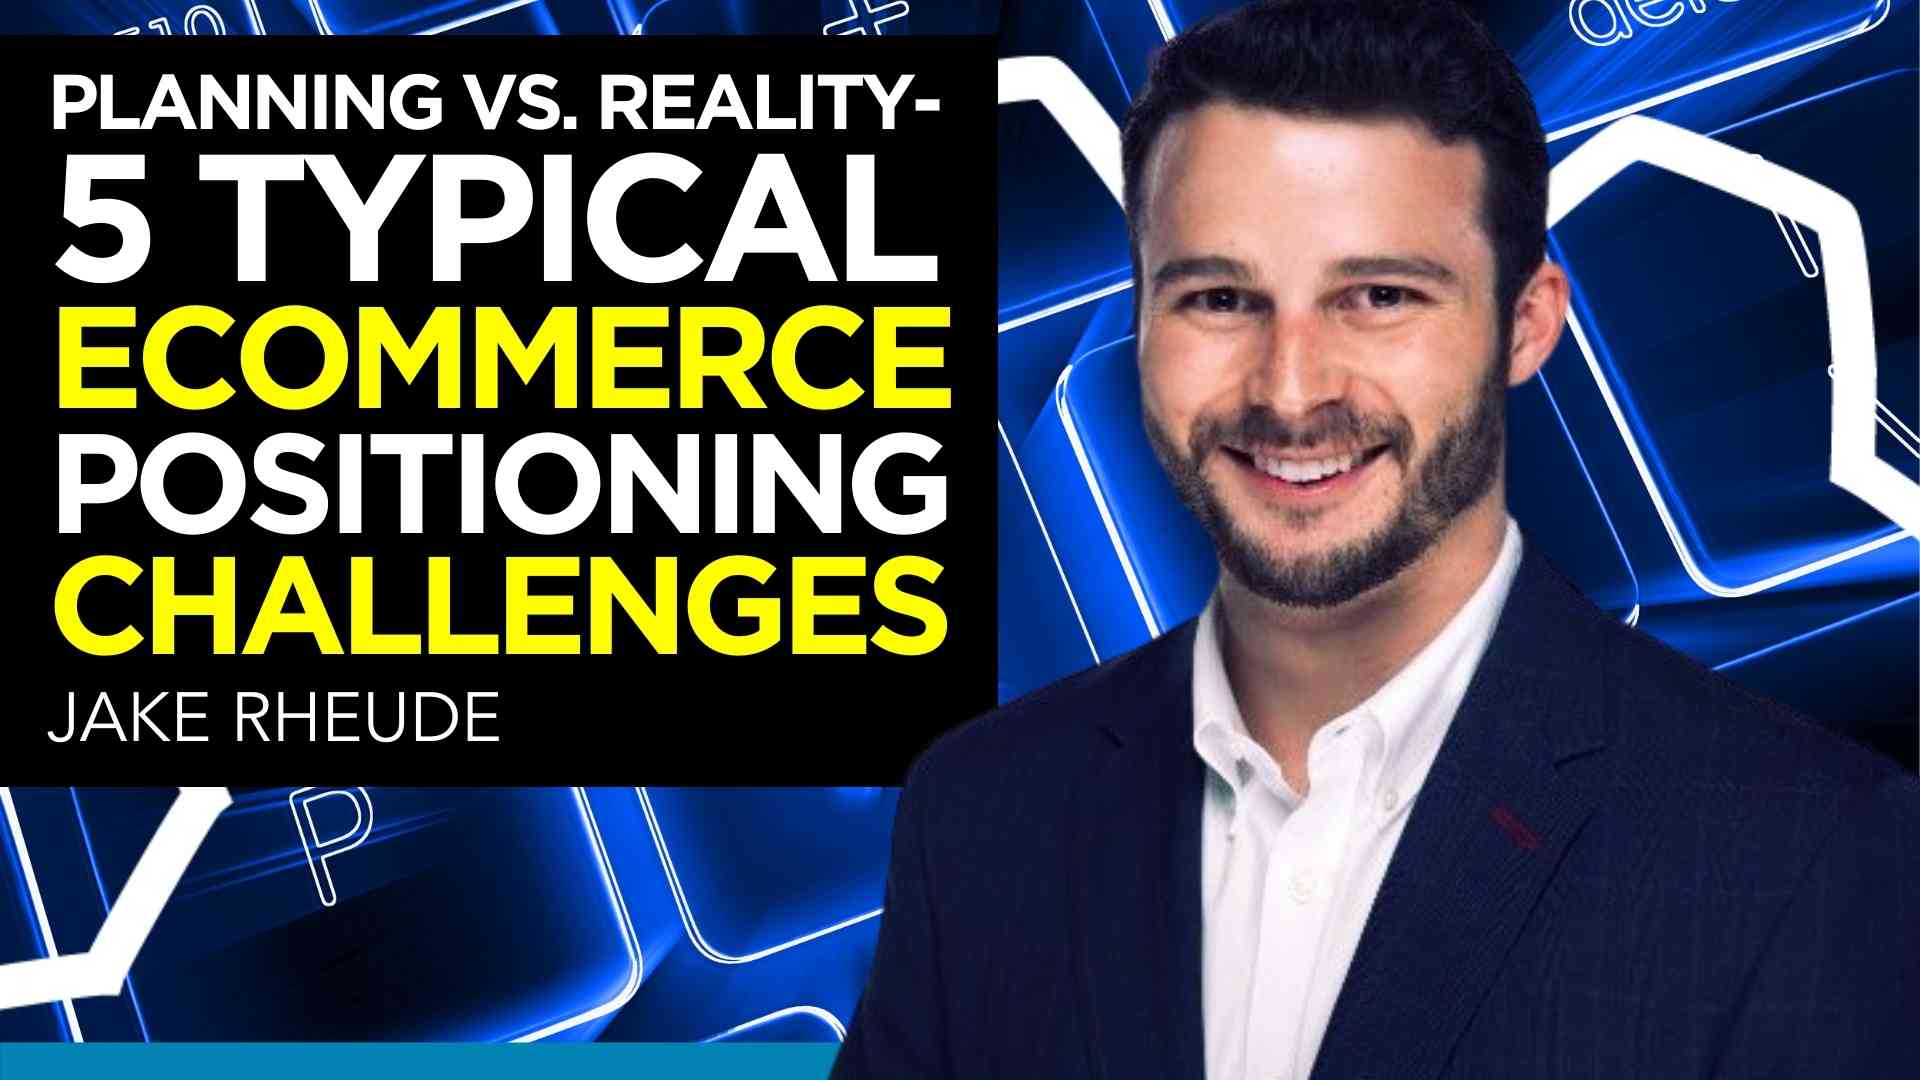 Planning Vs. Reality - 5 Typical Ecommerce Positioning Challenges